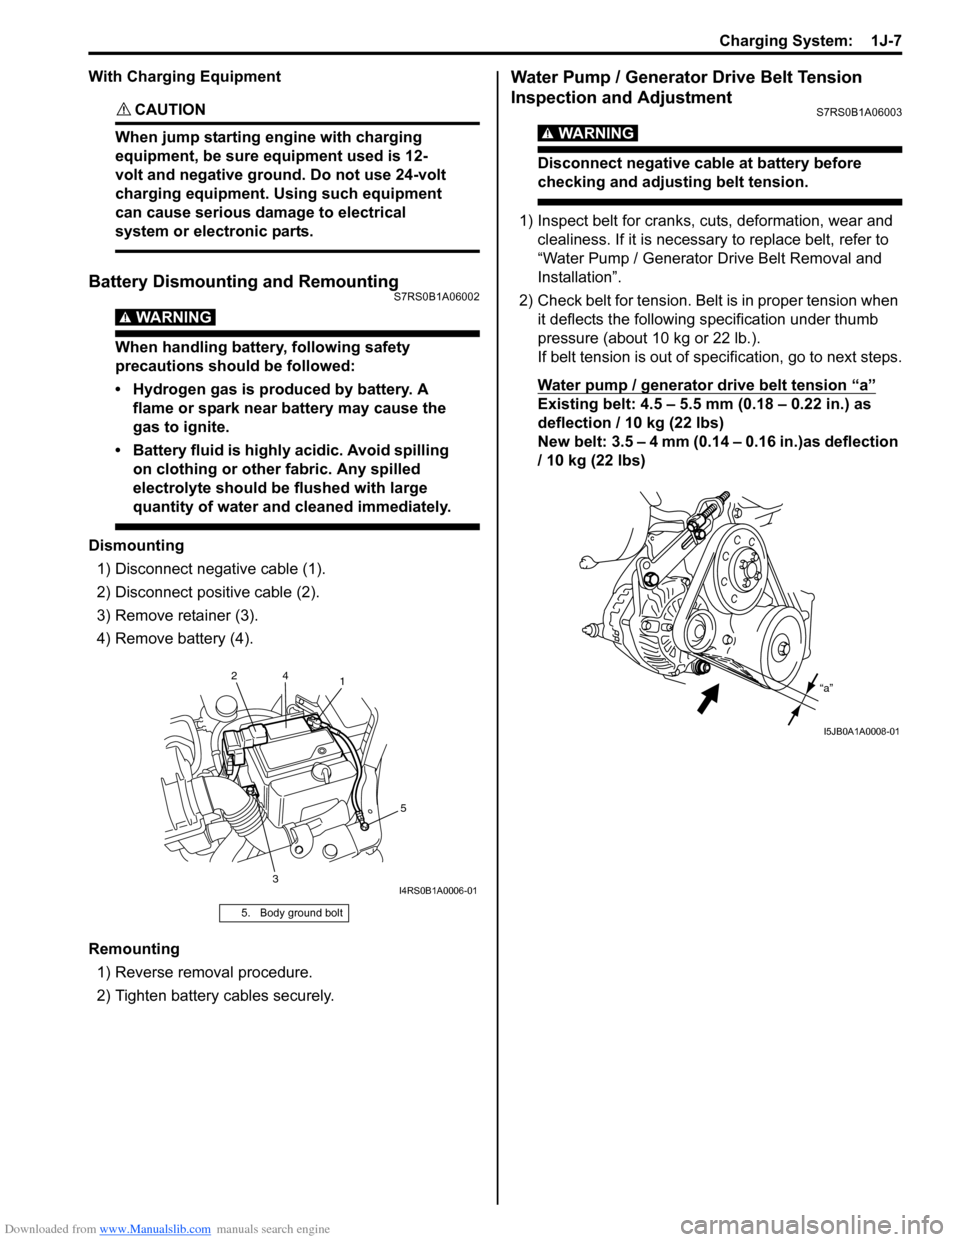 SUZUKI SWIFT 2005 2.G Service Owners Manual Downloaded from www.Manualslib.com manuals search engine Charging System:  1J-7
With Charging Equipment
CAUTION! 
When jump starting engine with charging 
equipment, be sure equipment used is 12-
volt